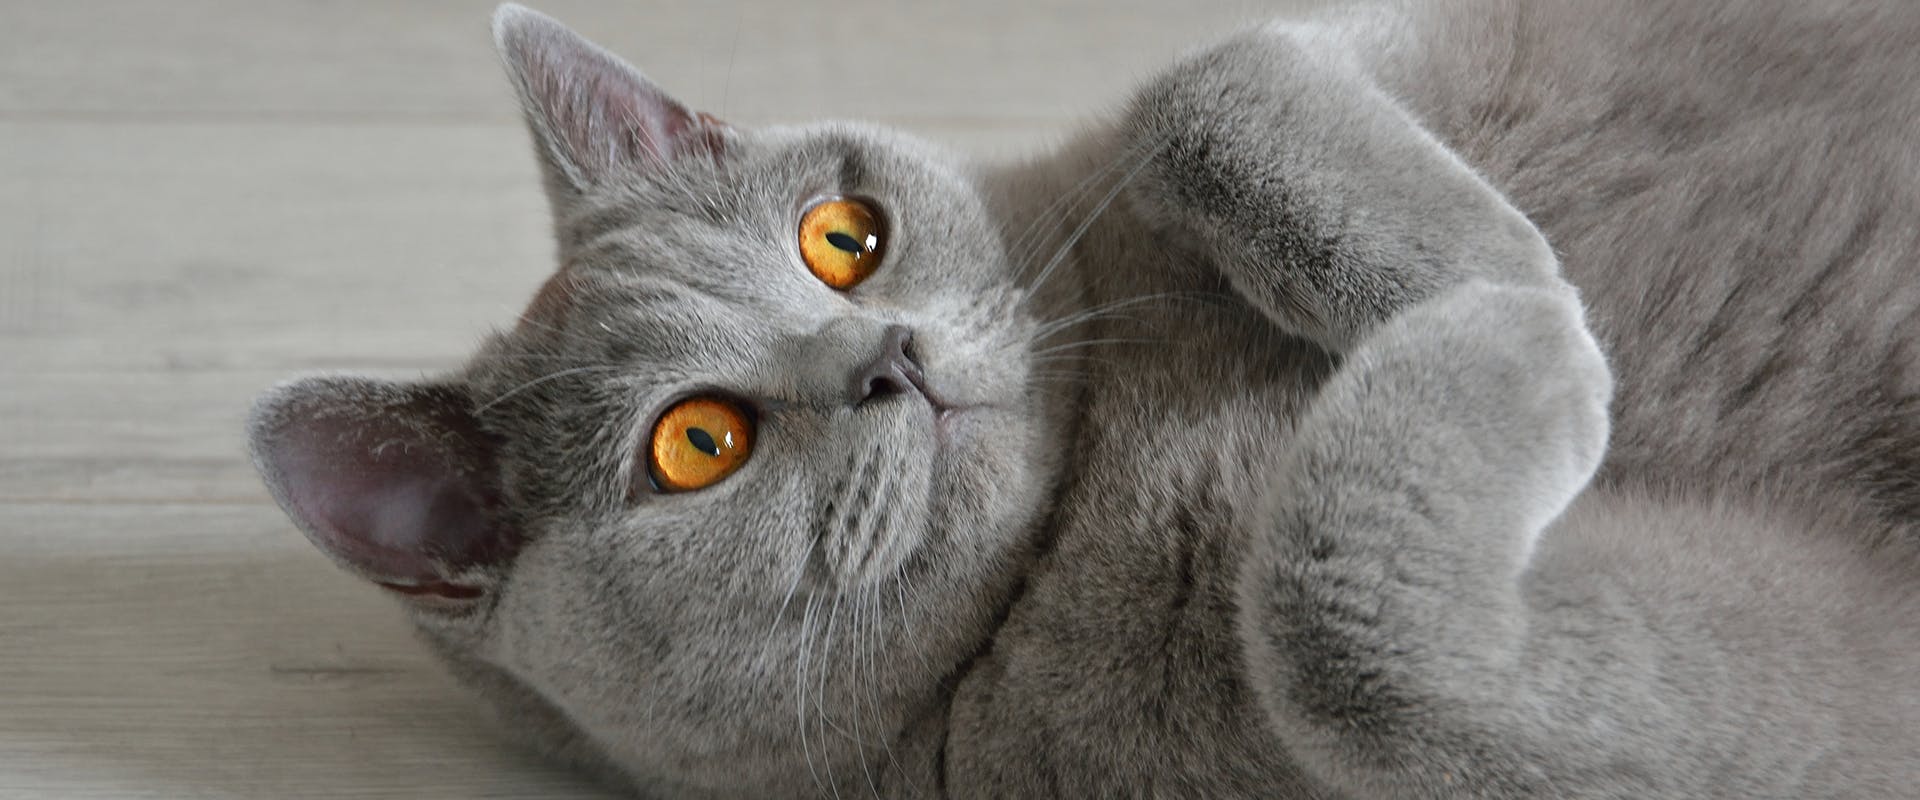 A British Shorthair, a large cat breed